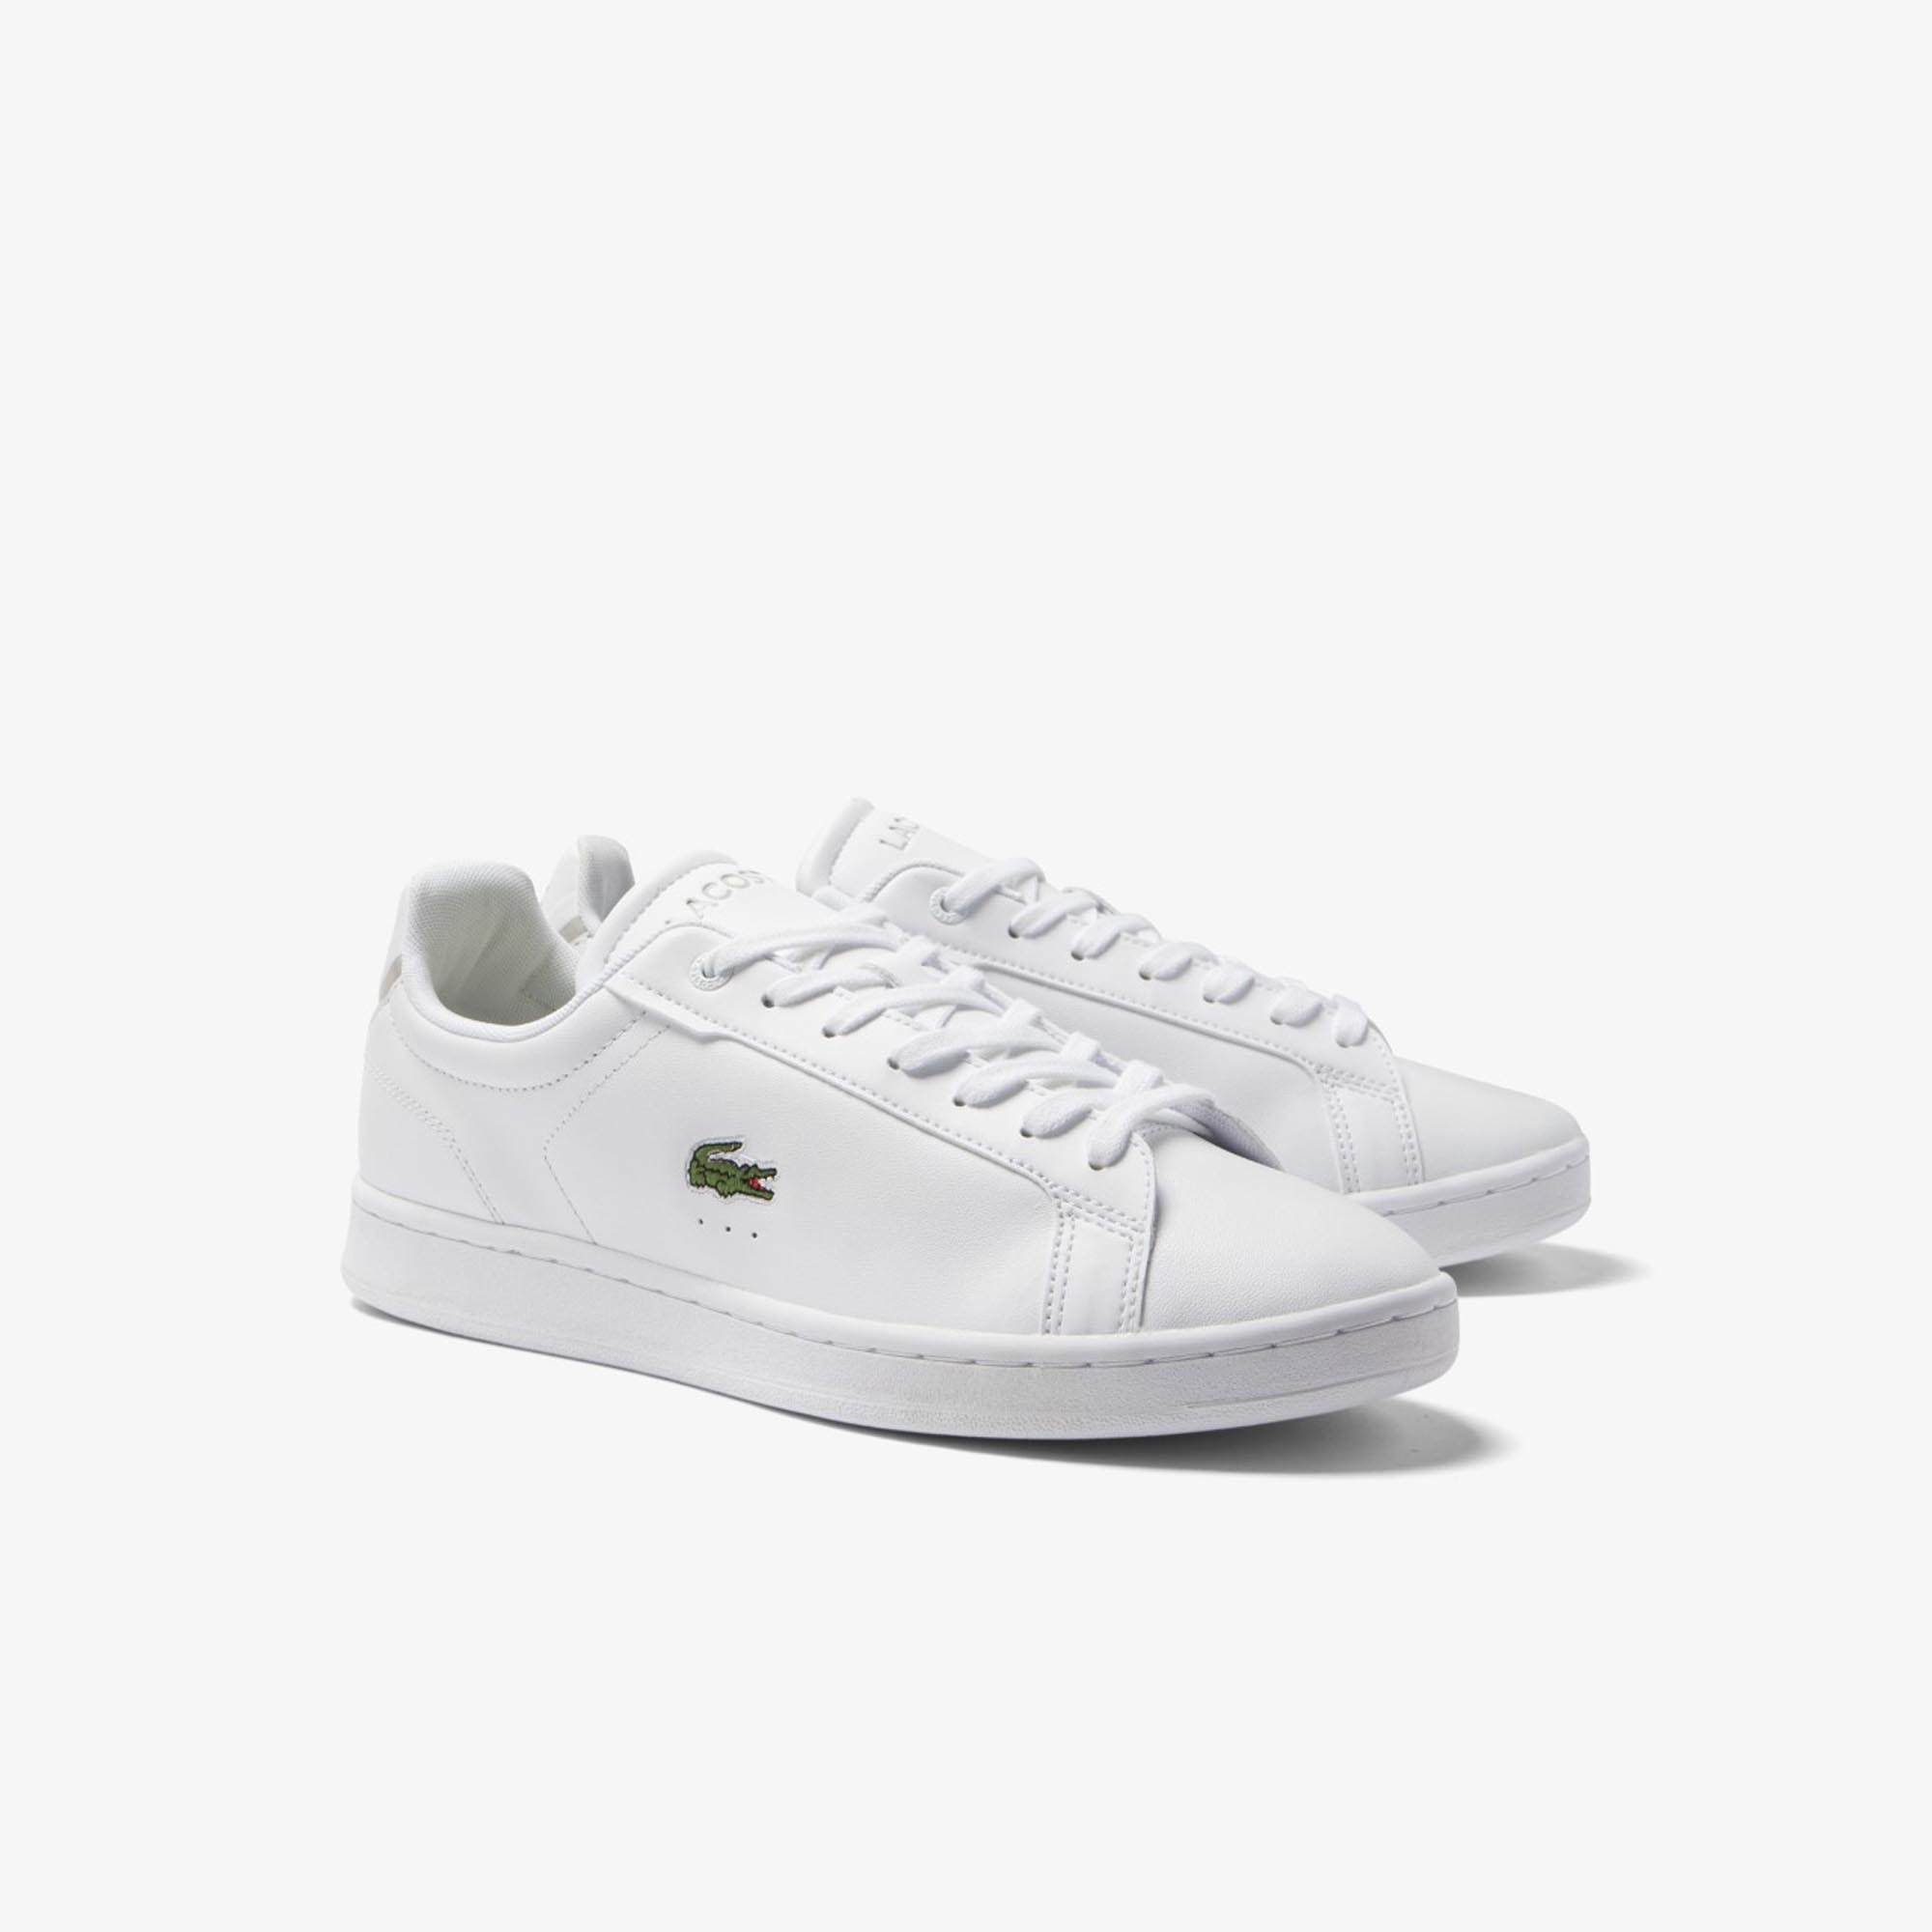 LACOSTE Carnaby Pro BL23 Heren